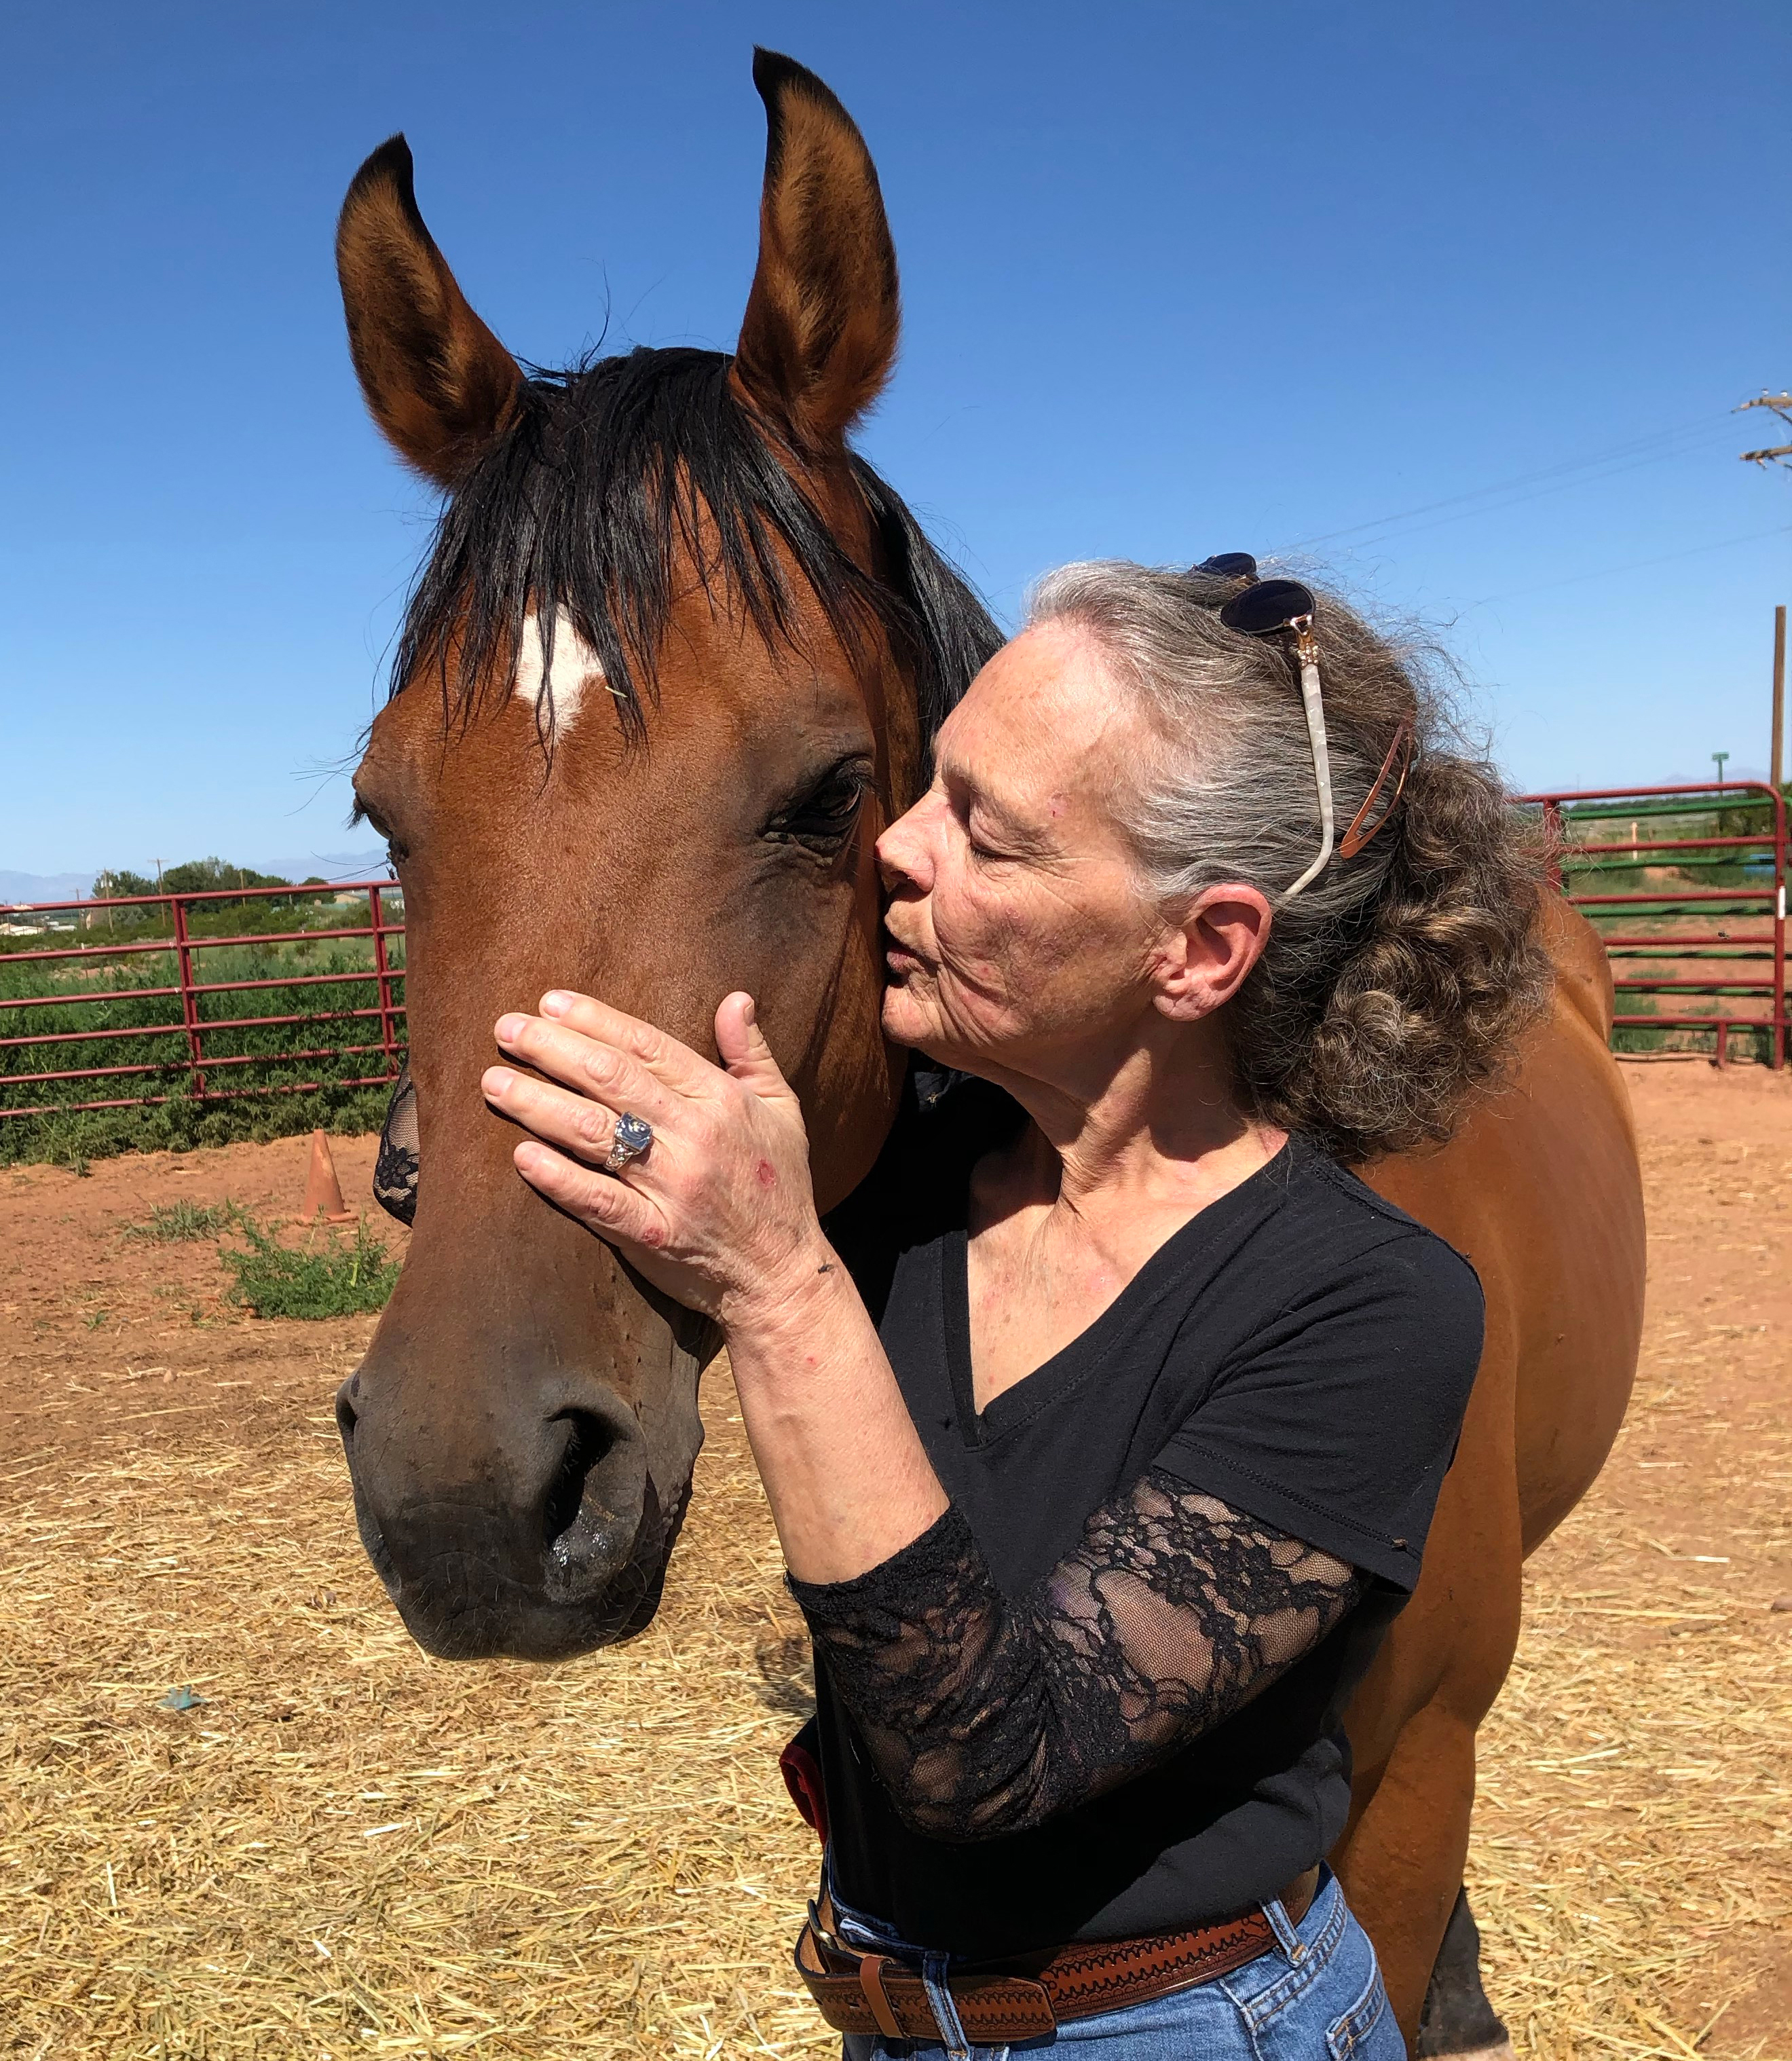 A photo shows Suzanne BeHanna with a horse.